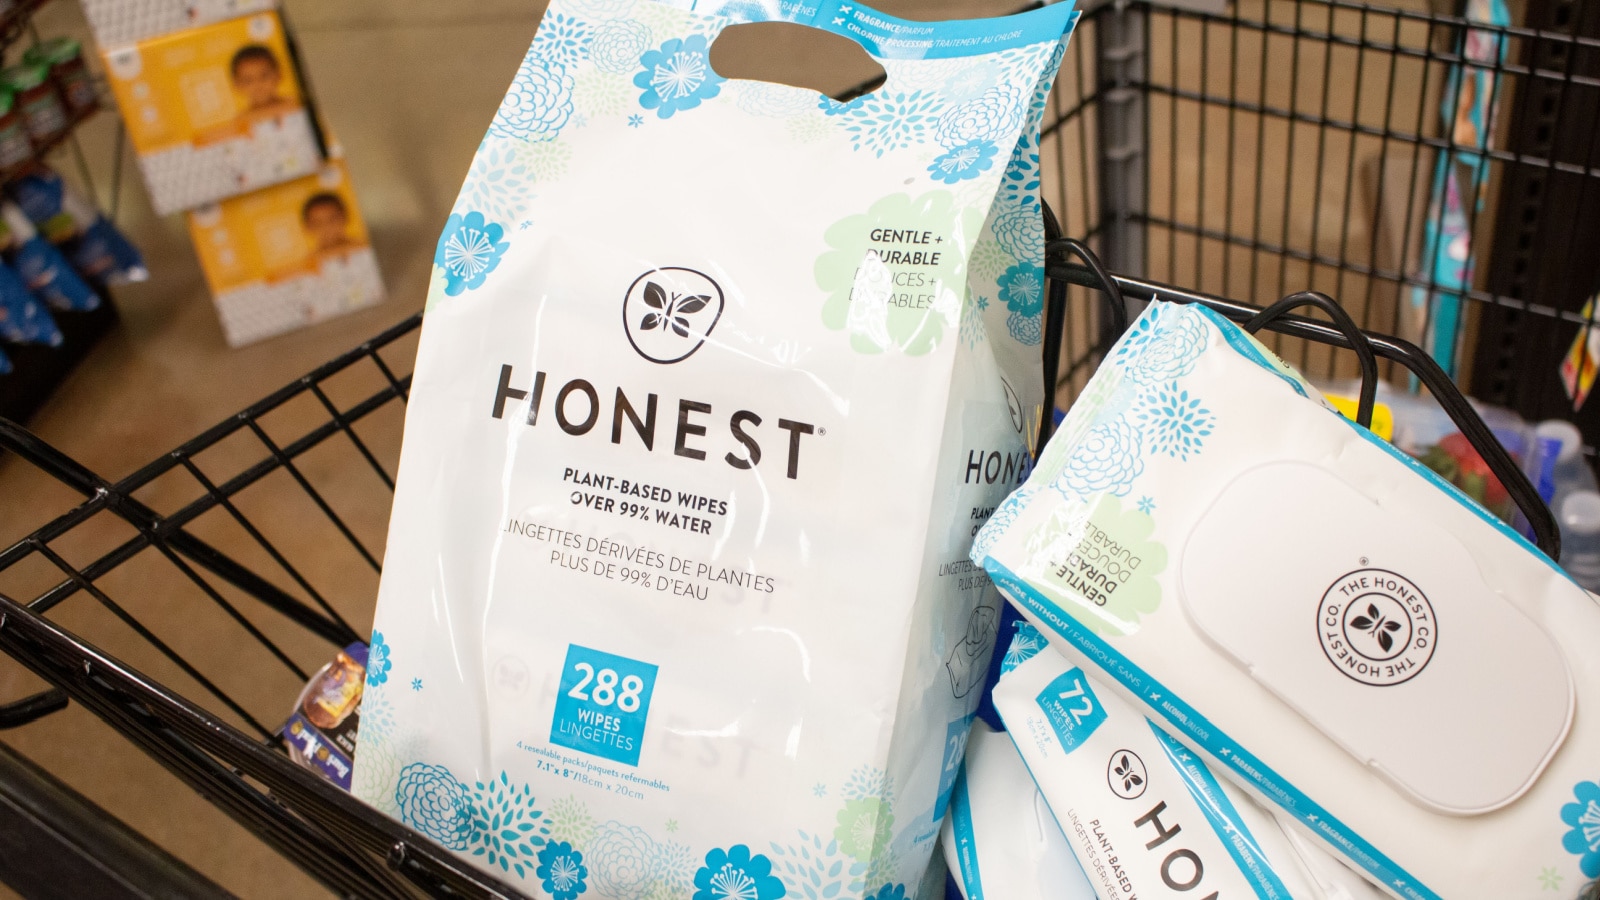 Los Angeles, California, United States - 05-21-2021: A view of Honest Company products inside a shopping cart, featuring plant-based baby wipes.